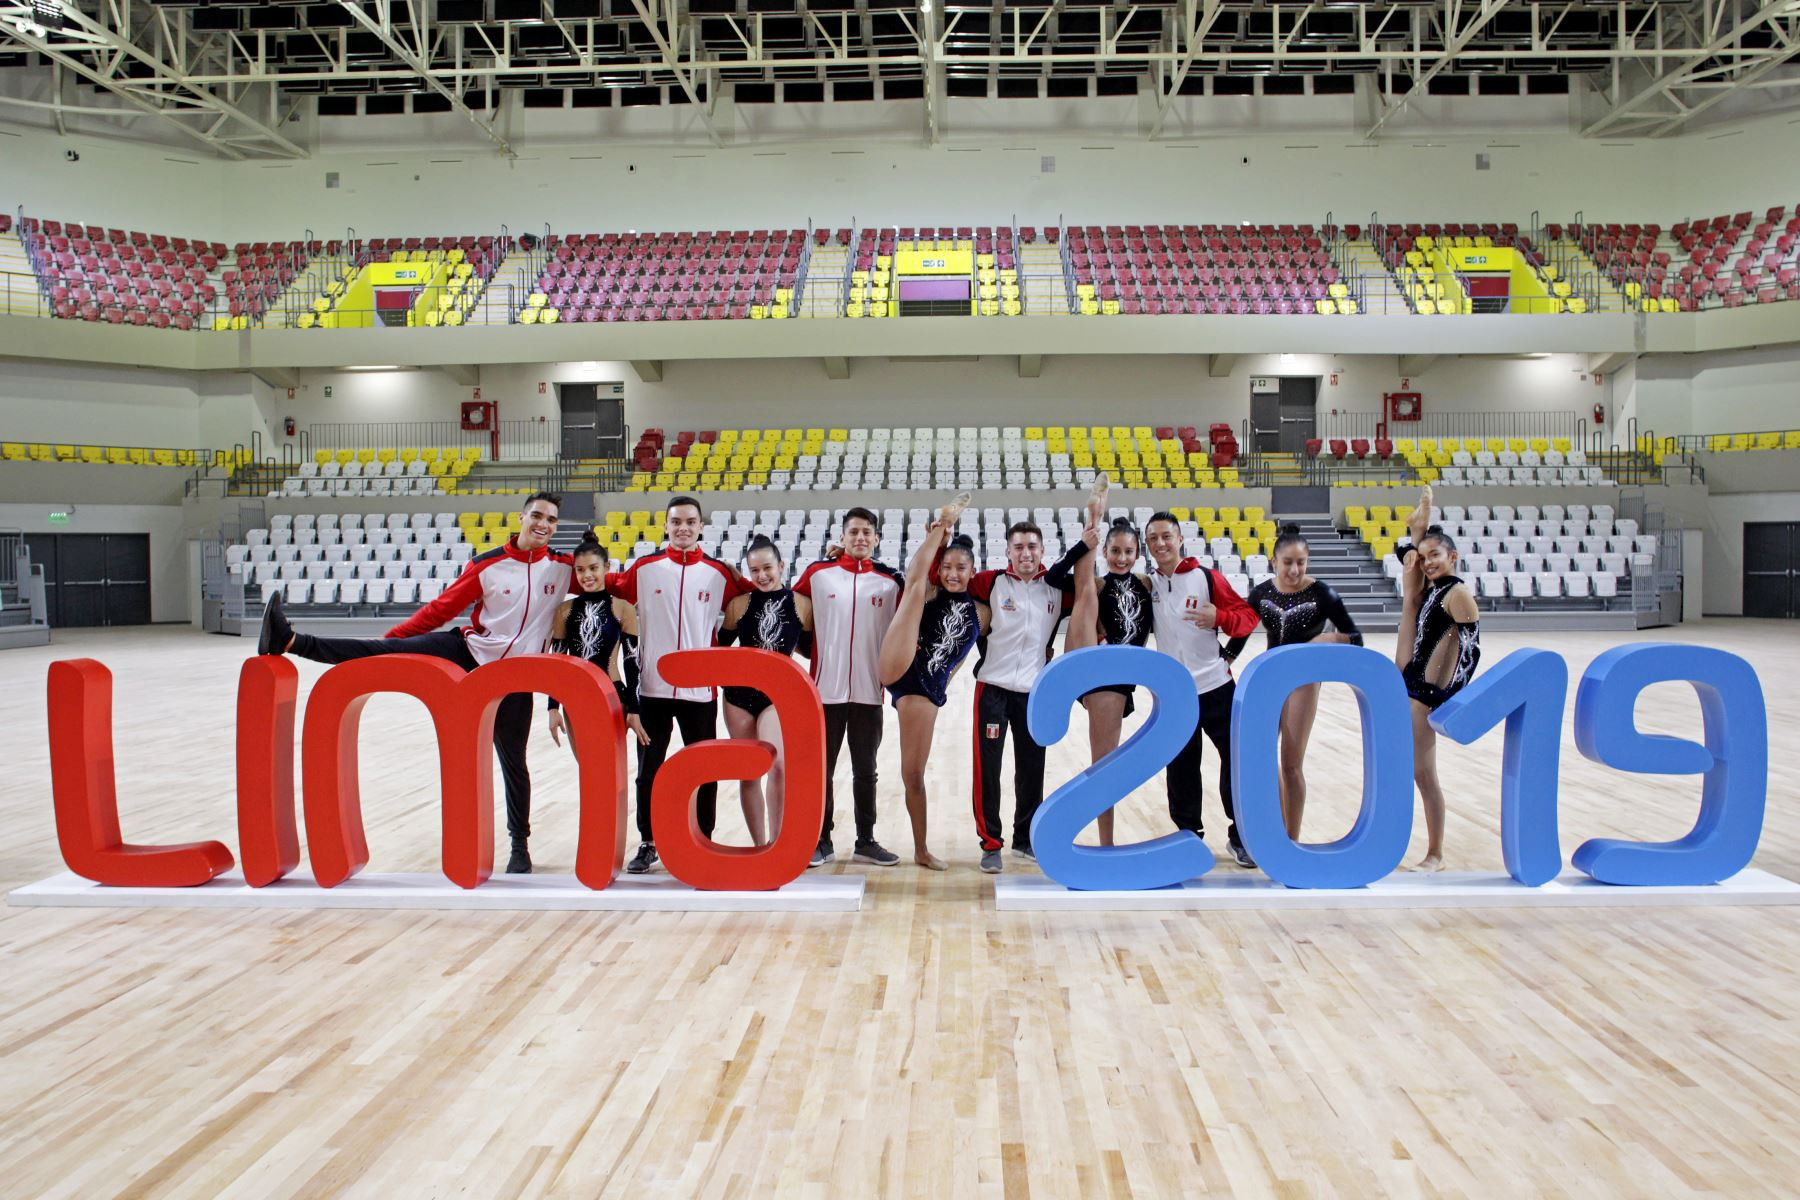 Two of the major venues for the 2019 Pan-American Games in Lima have been completed, including the one that will be used for gymnastics ©Lima 2019